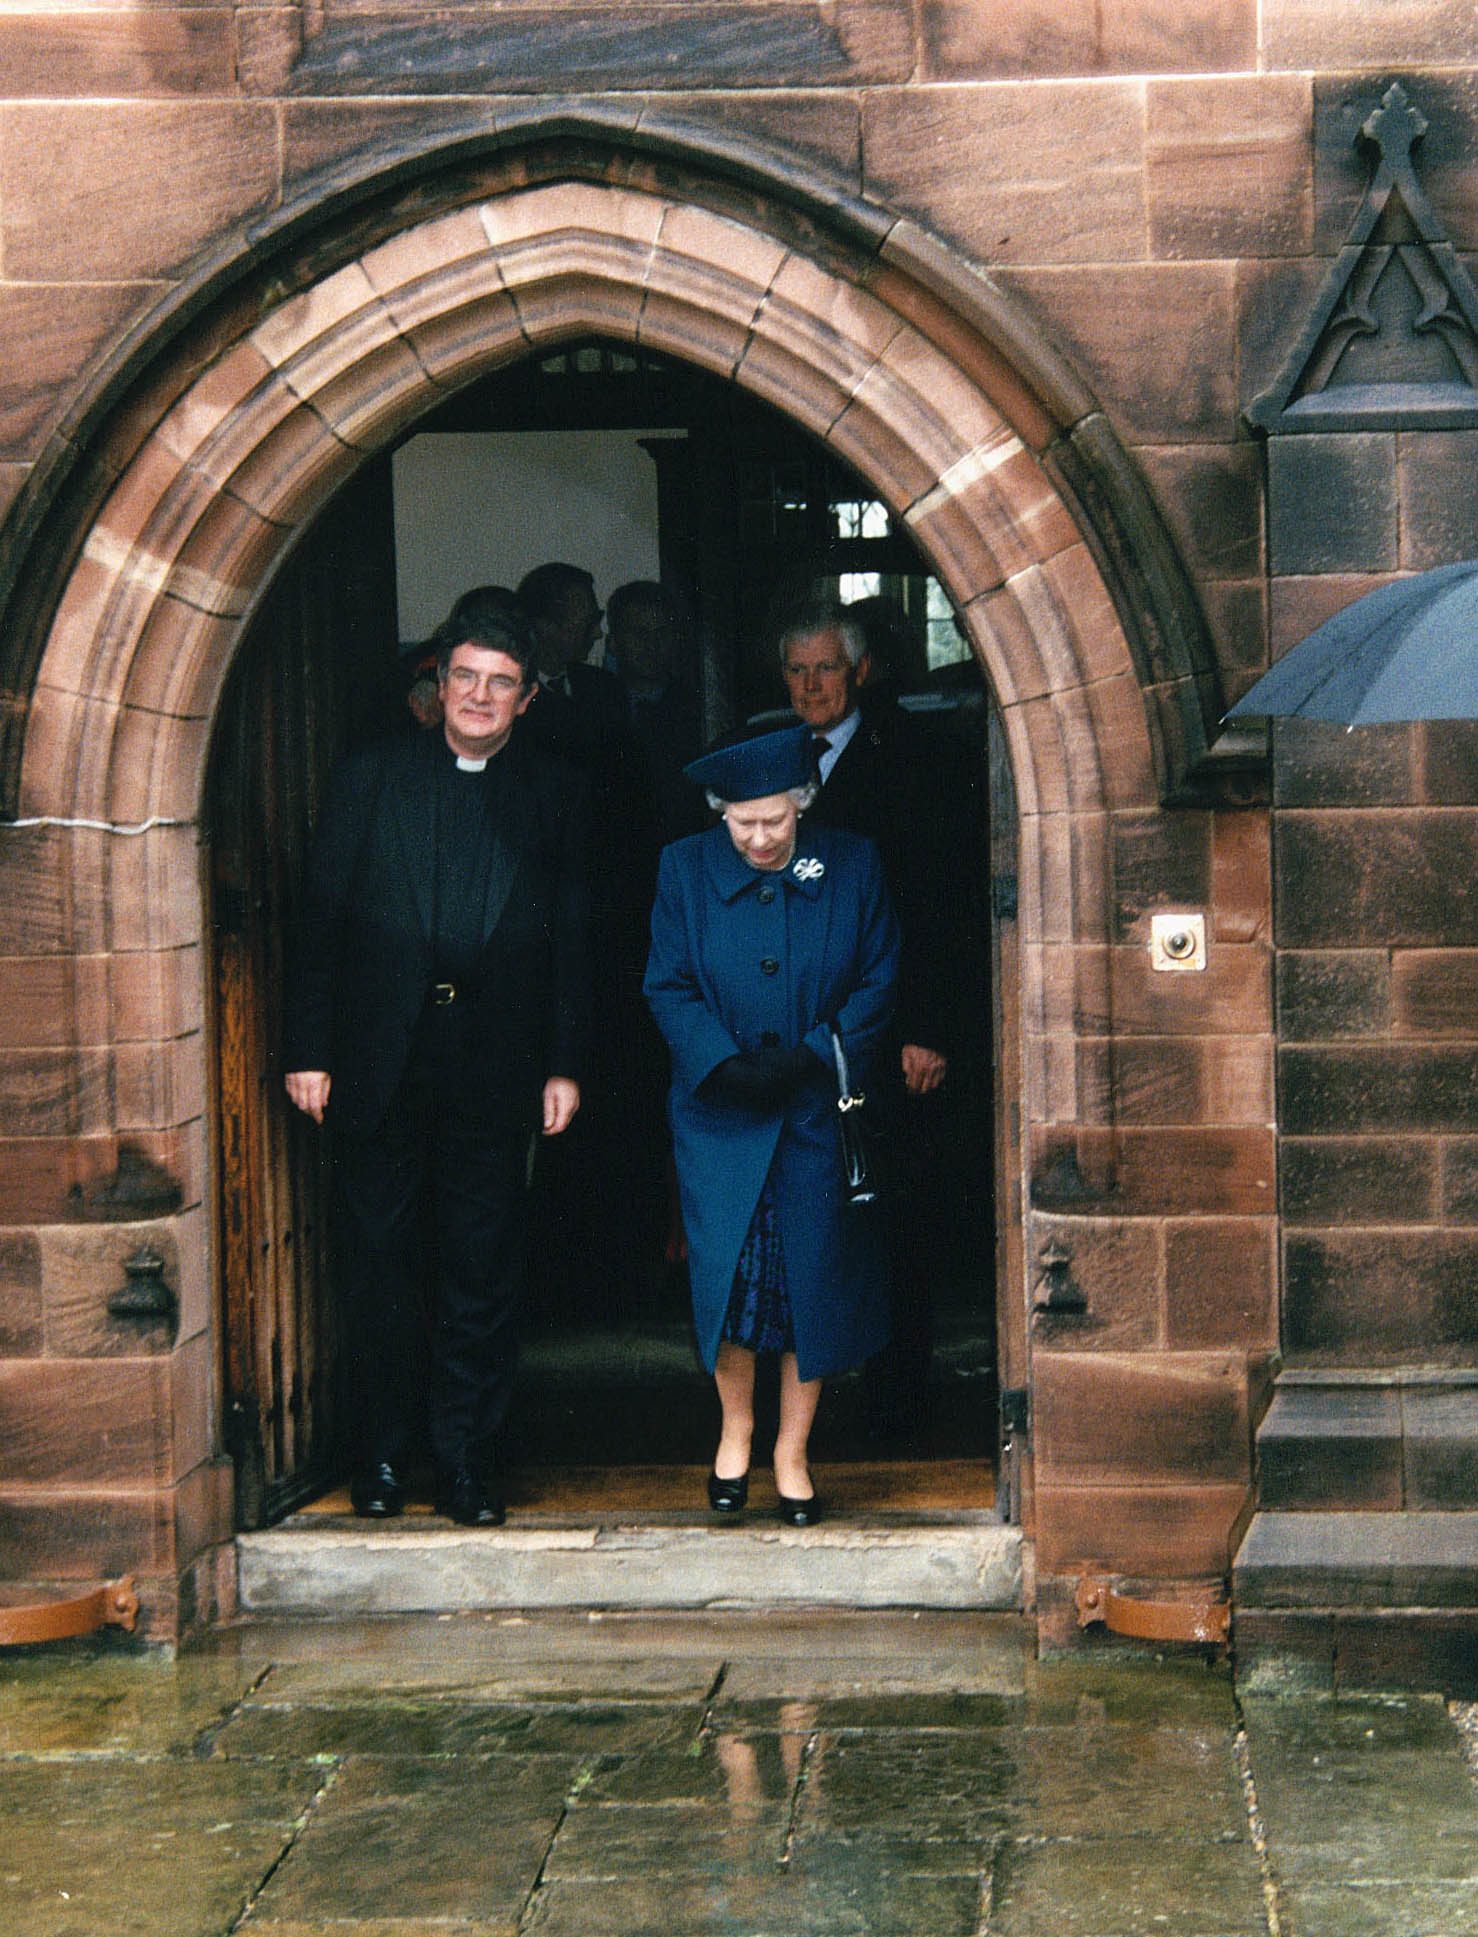 Queen Elizabeth II and Warden Peter Francis in the Library porch.